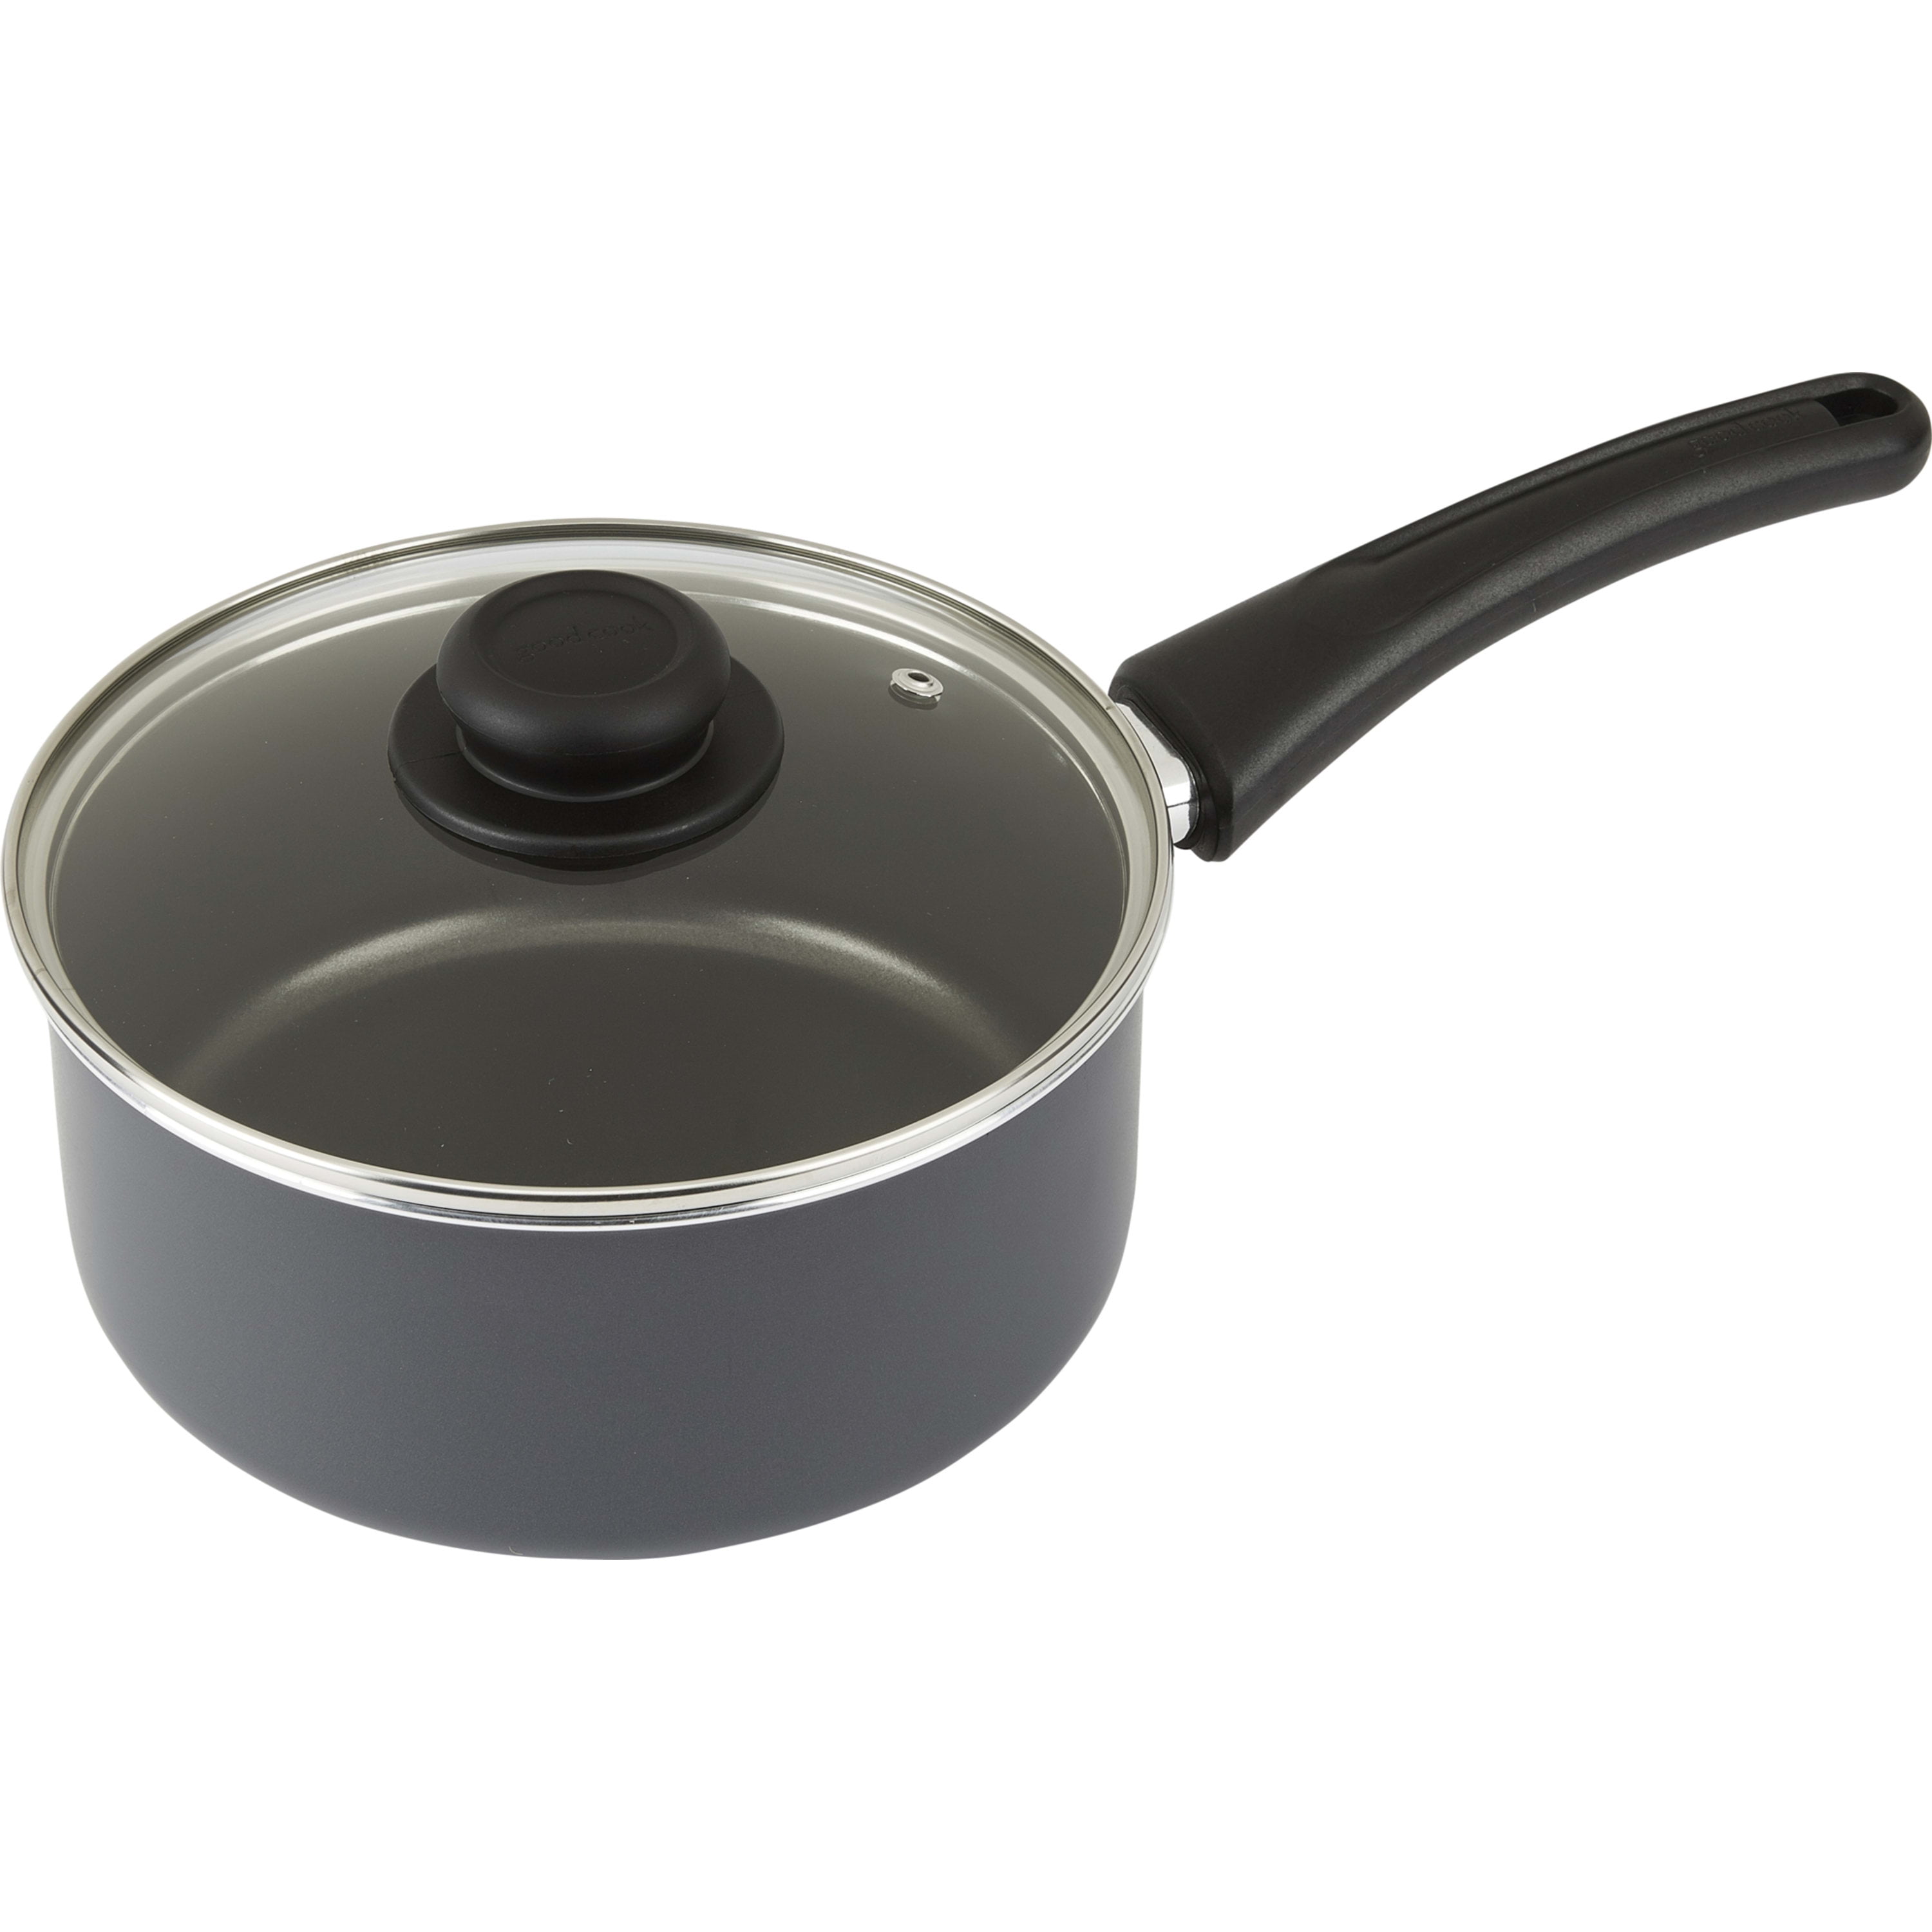  Cuisinart Custom Clad 5-Ply Stainless Cookware 3 Qt. Saucepan  w/Cover, CC5193-18: Home & Kitchen